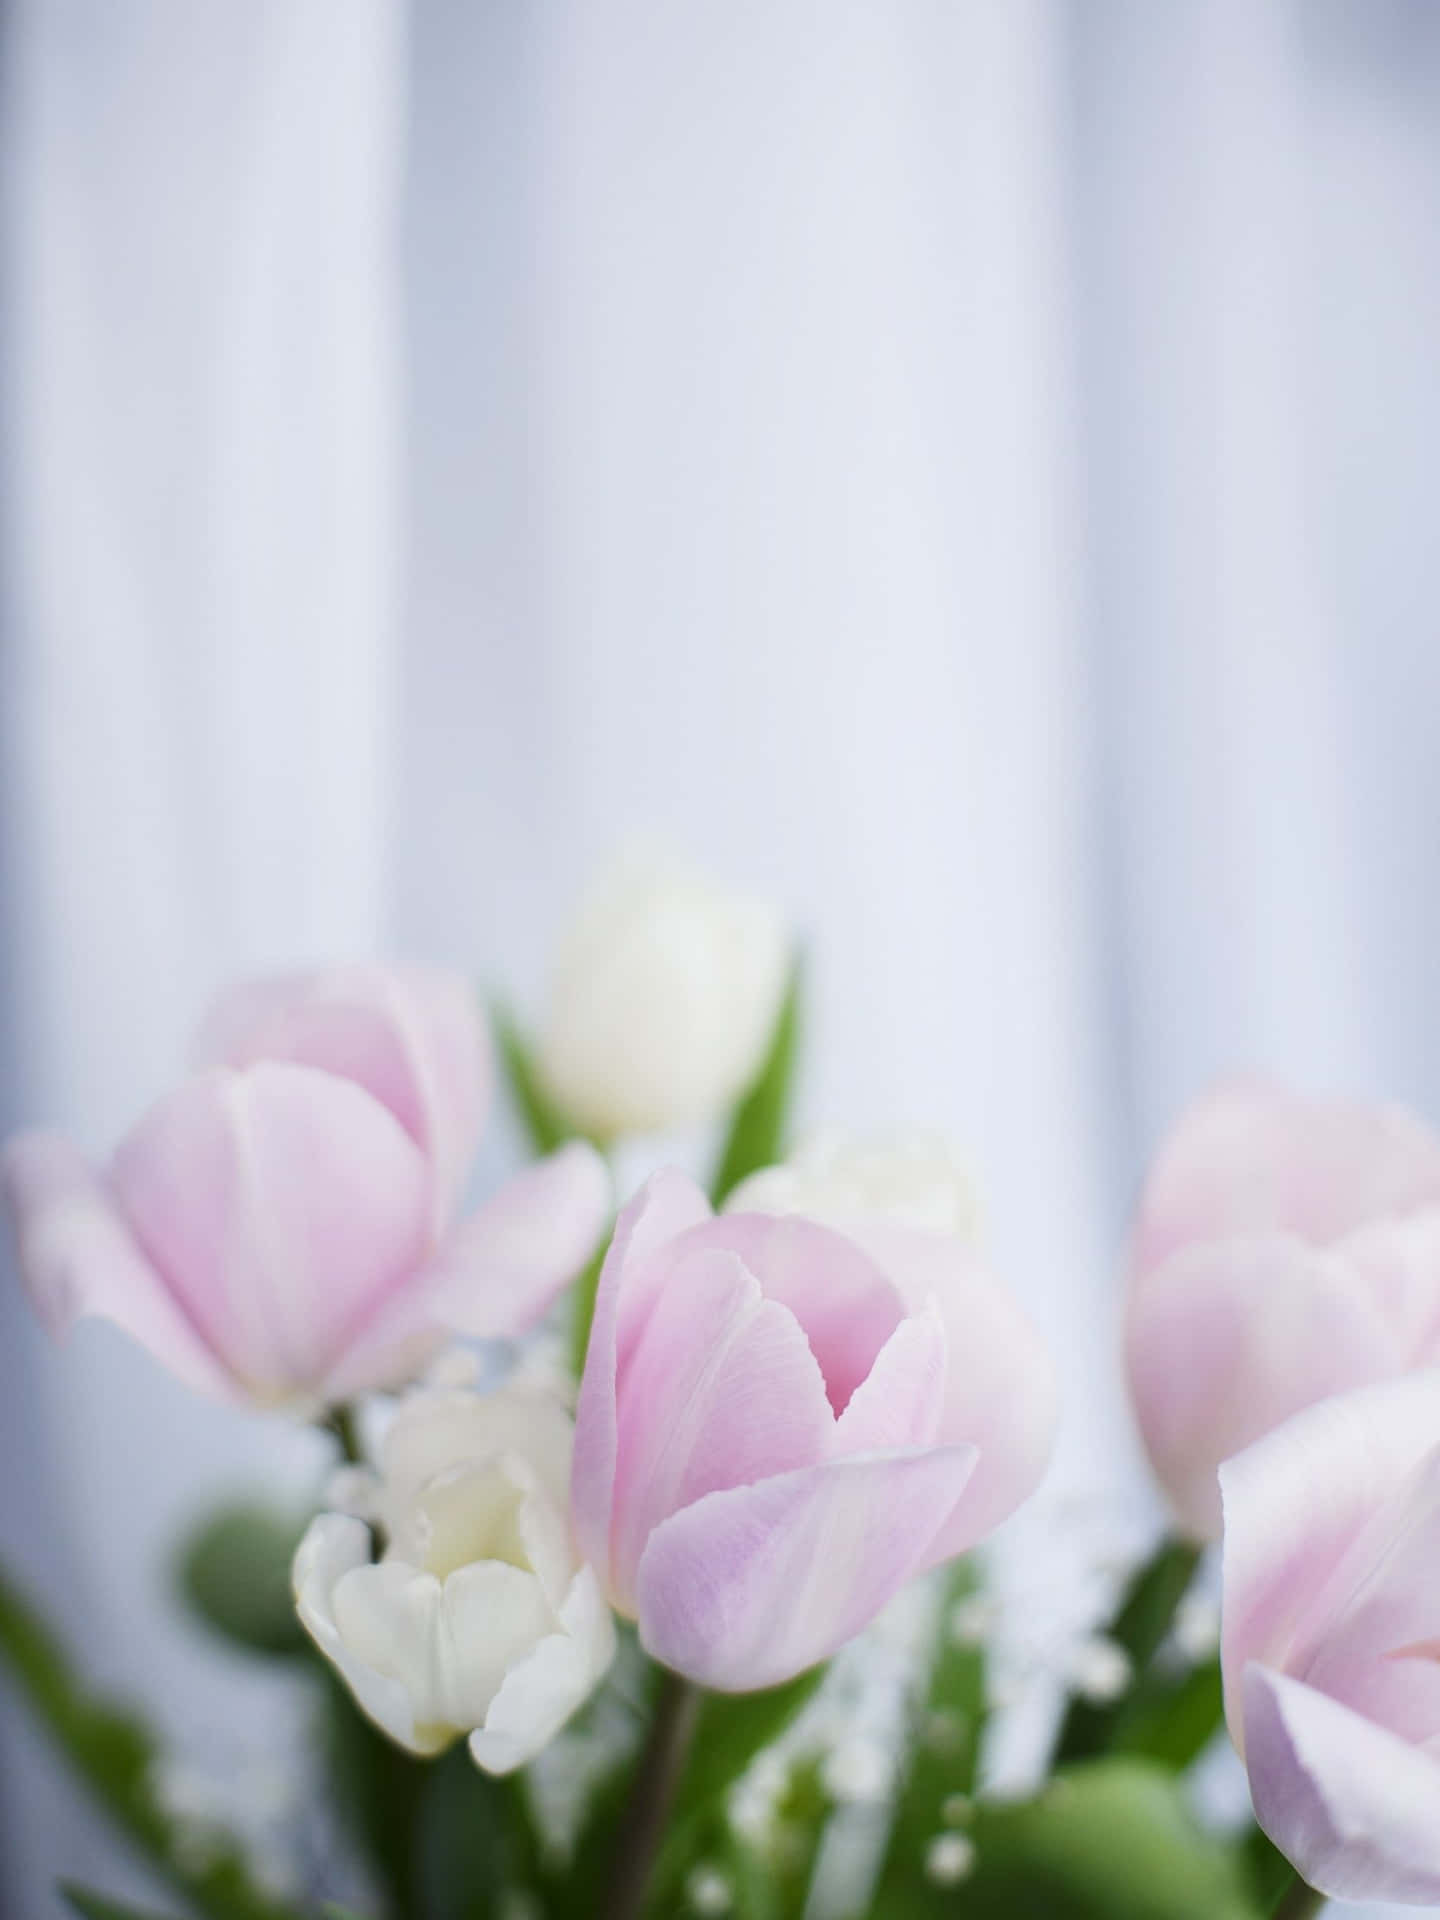 Pink And White Tulips In A Vase Wallpaper